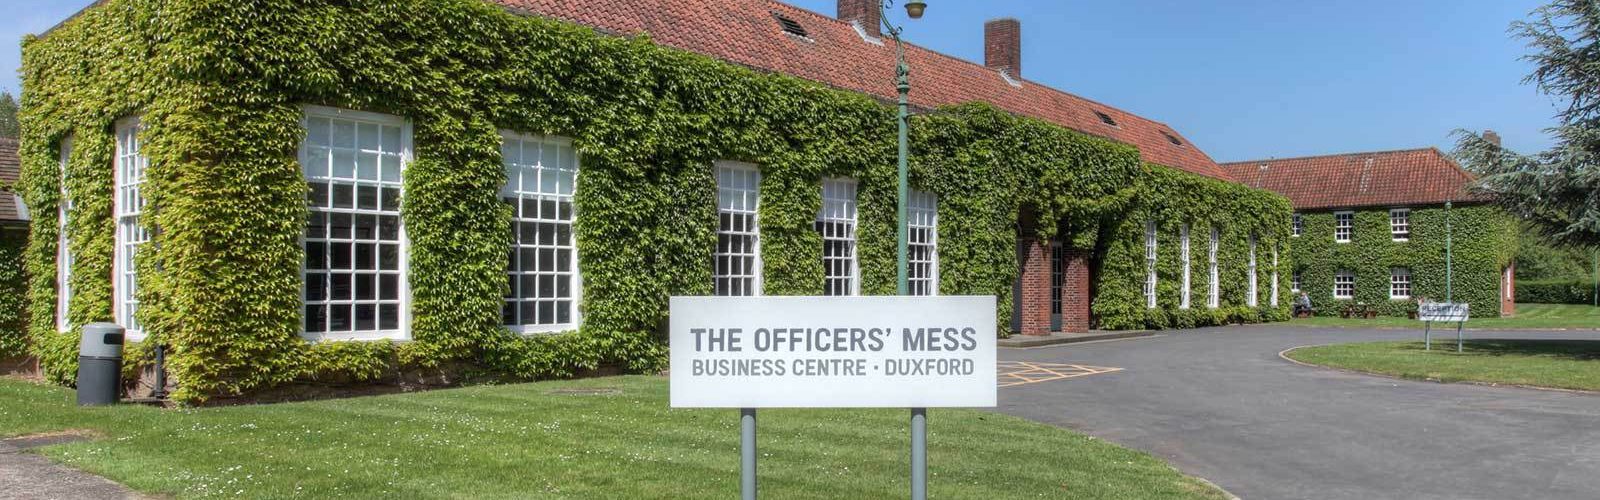 Duxford Officers Mess